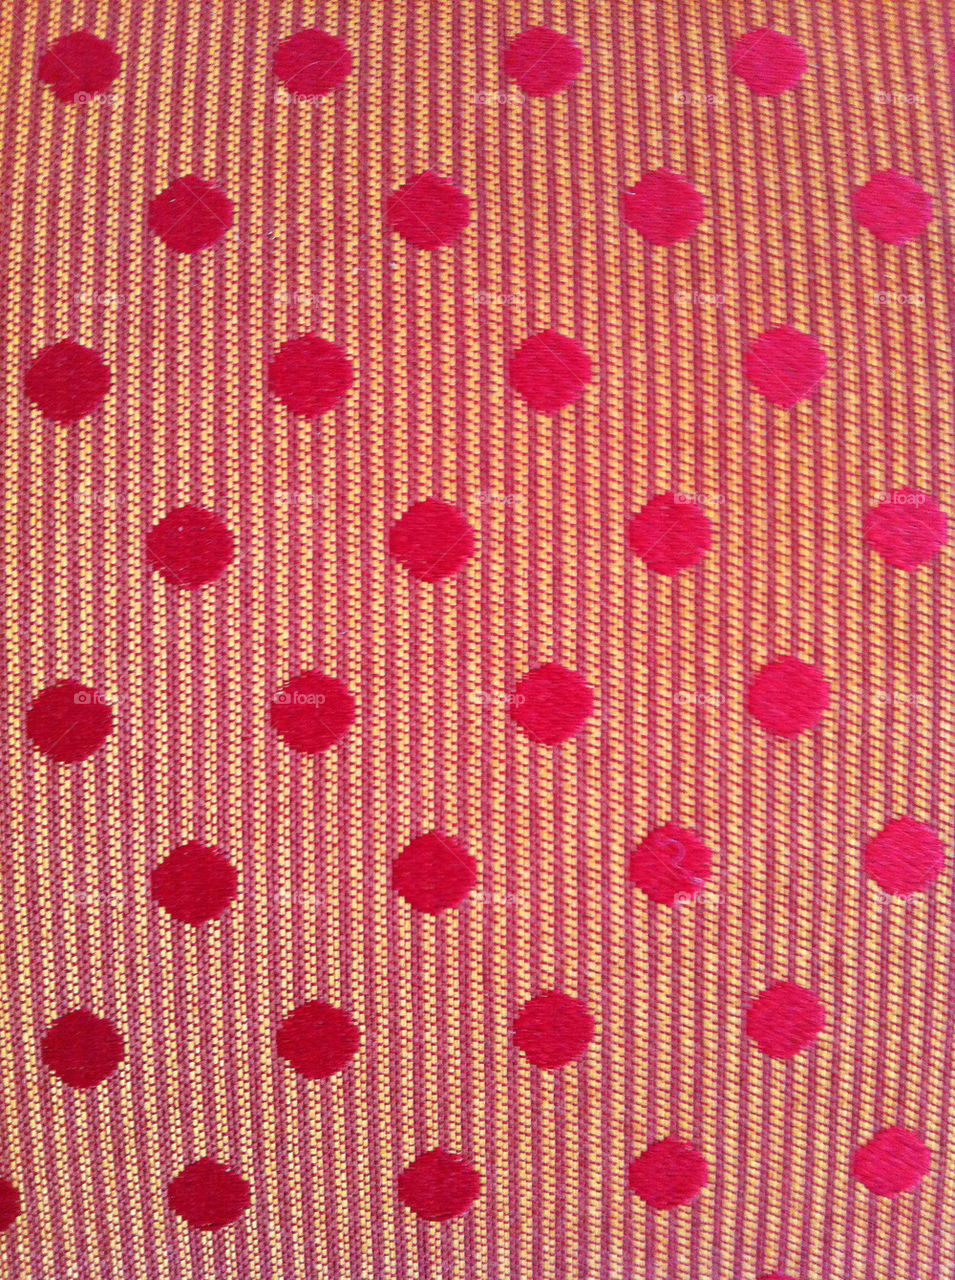 red background pattern dots by snapd